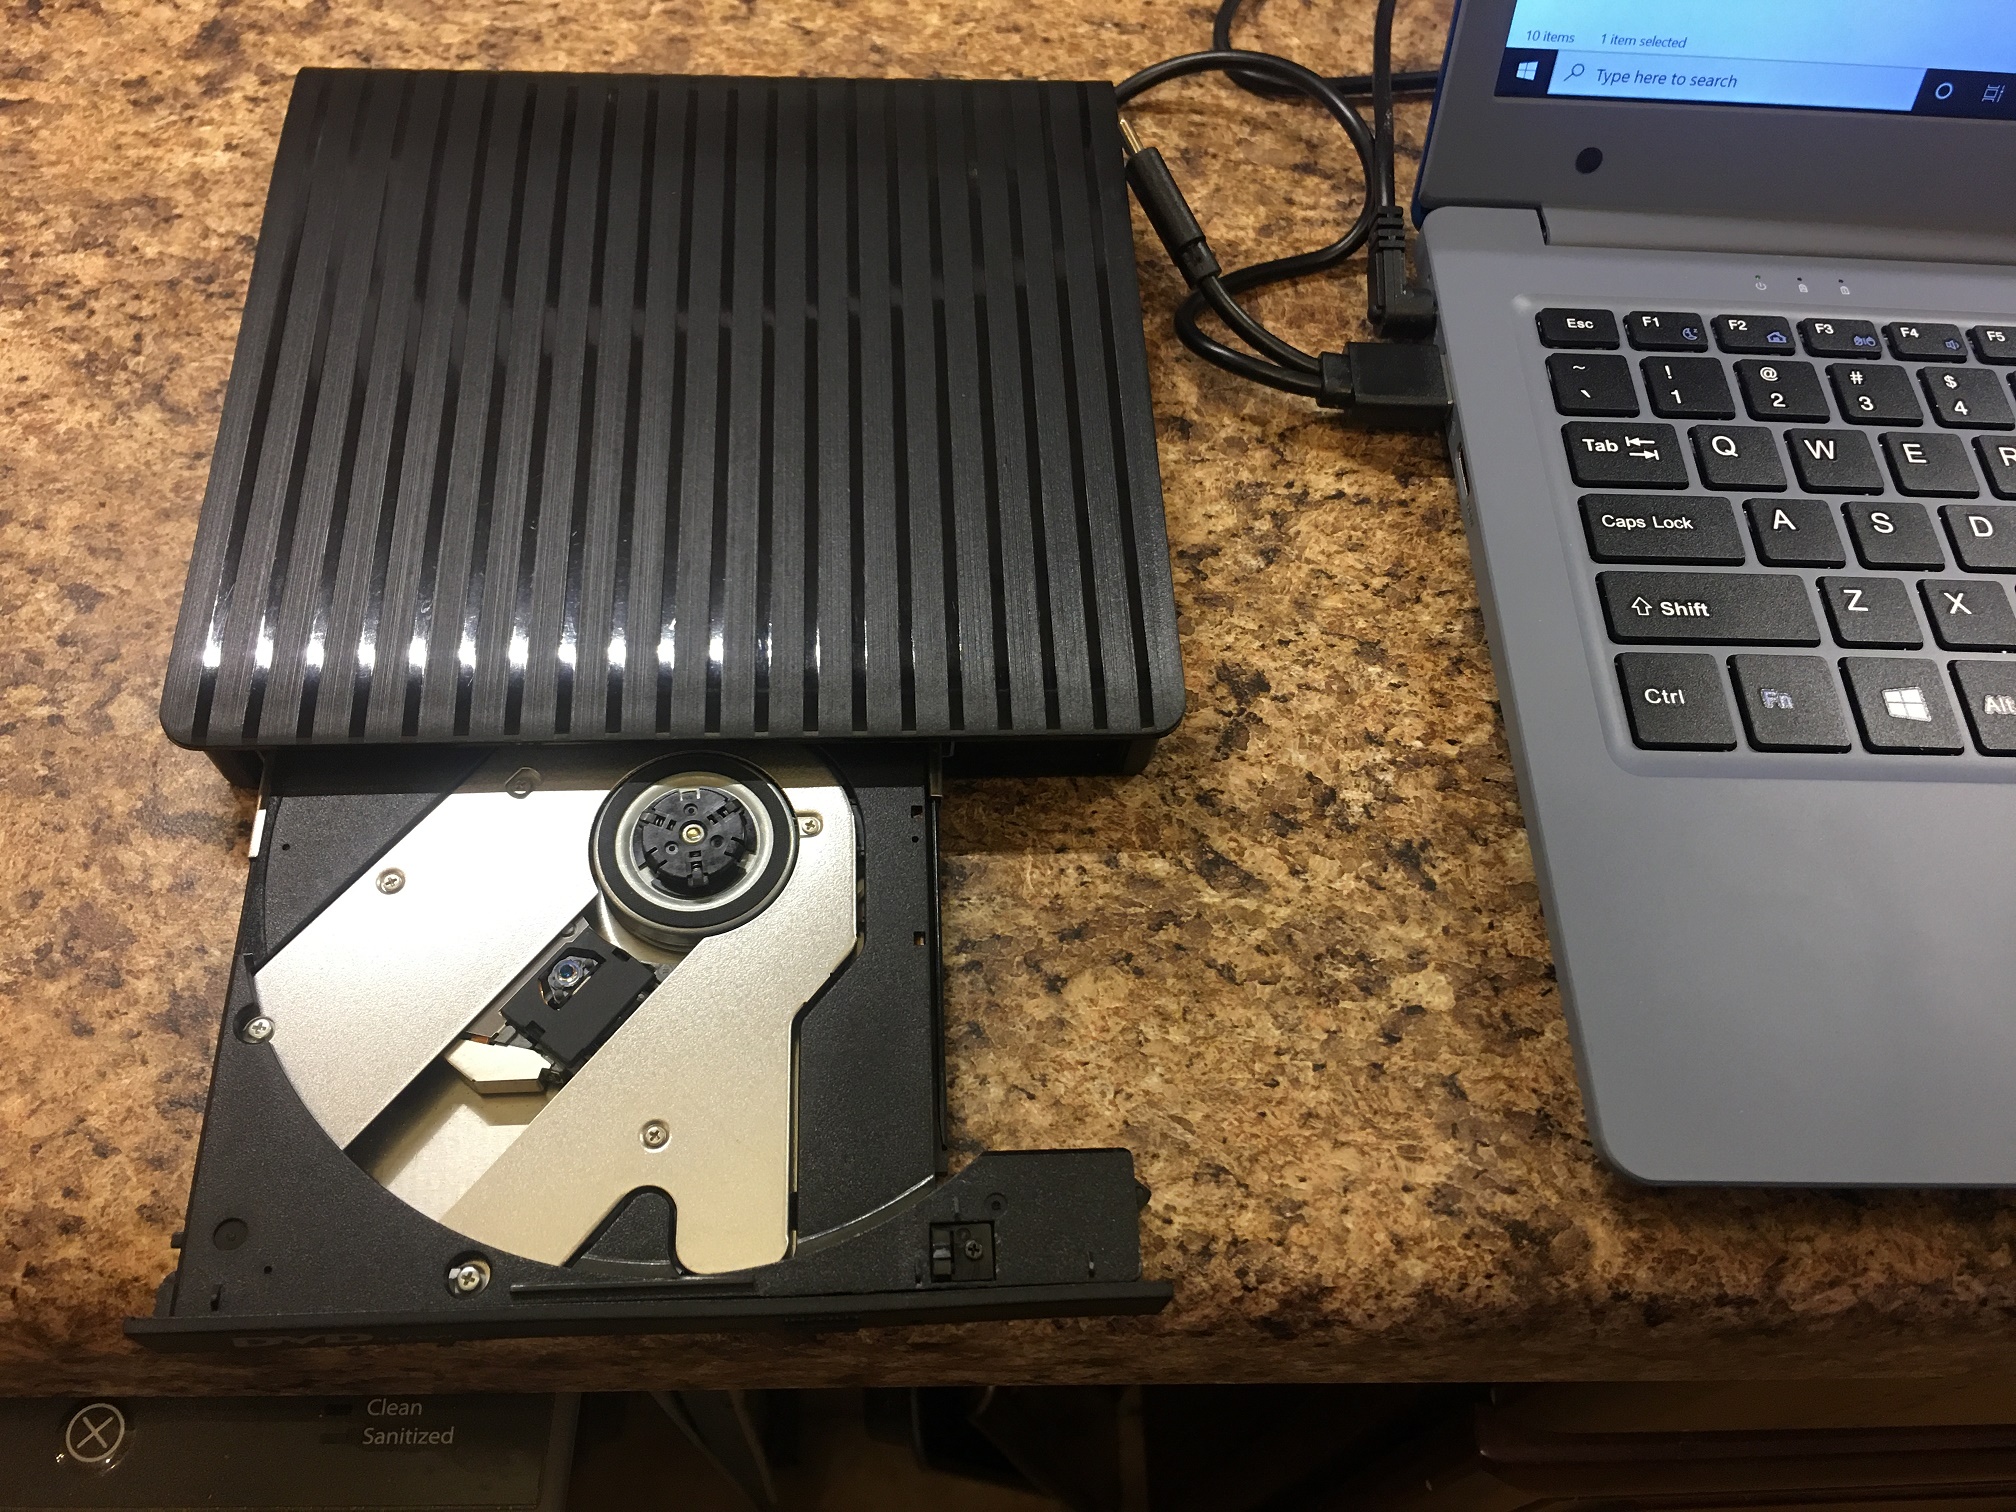 External CD/DVD/DVD-RW USB Drive for Chromebooks and other laptops etc